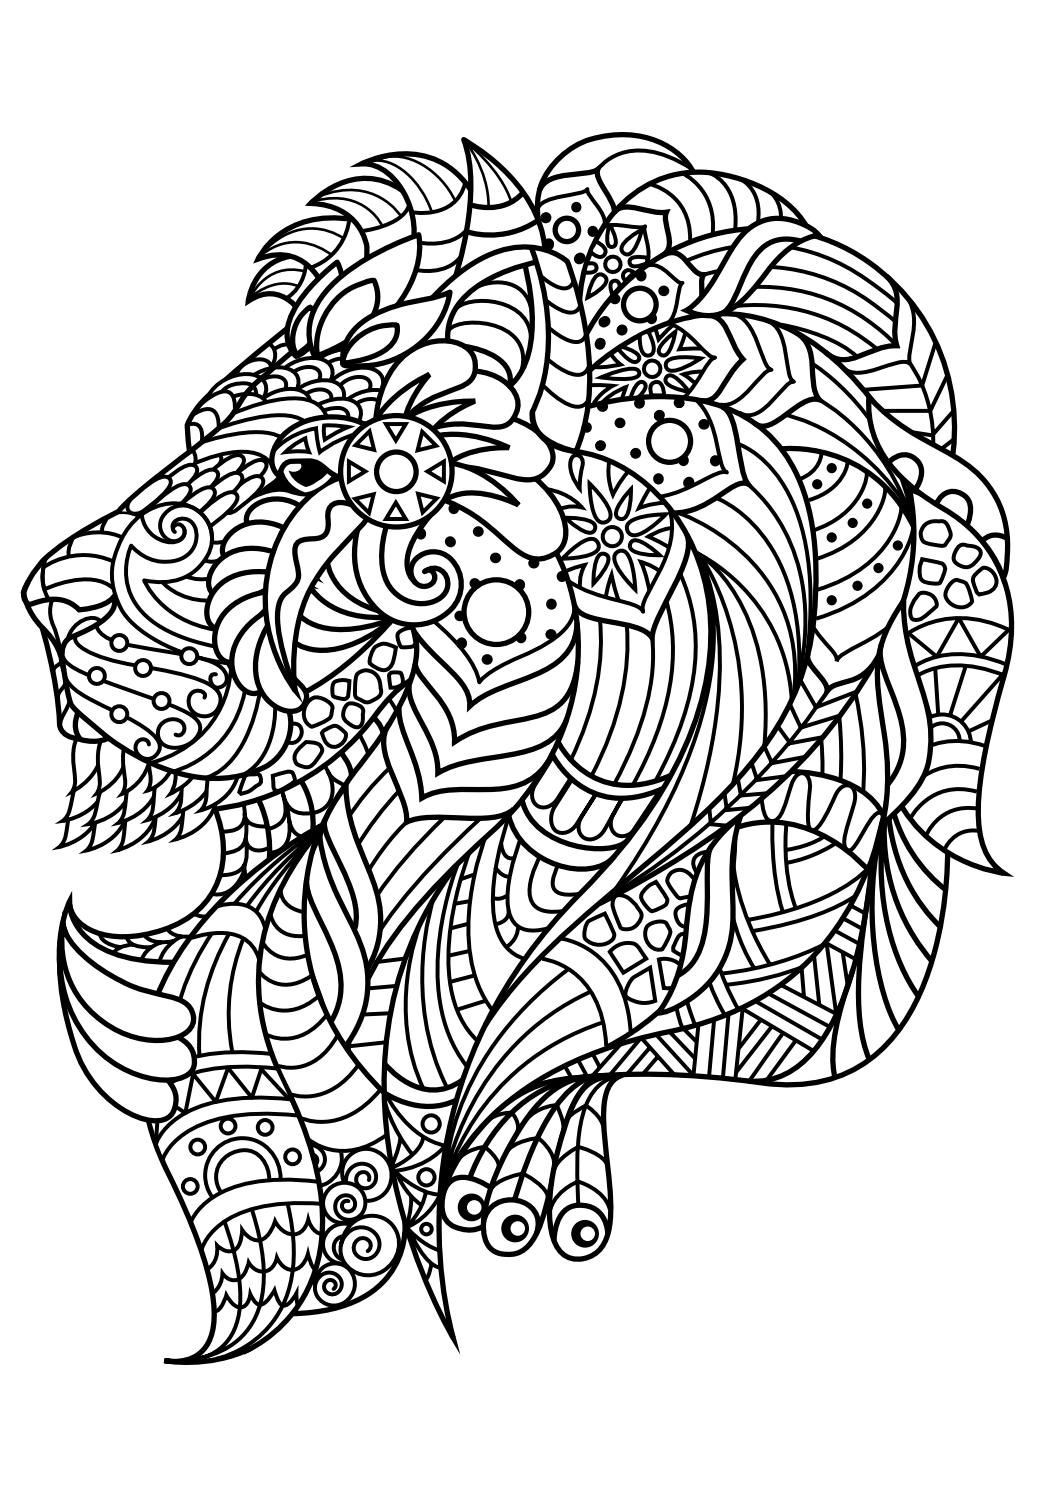 Printable Animal Coloring Pages For Adults
 Animal coloring pages pdf